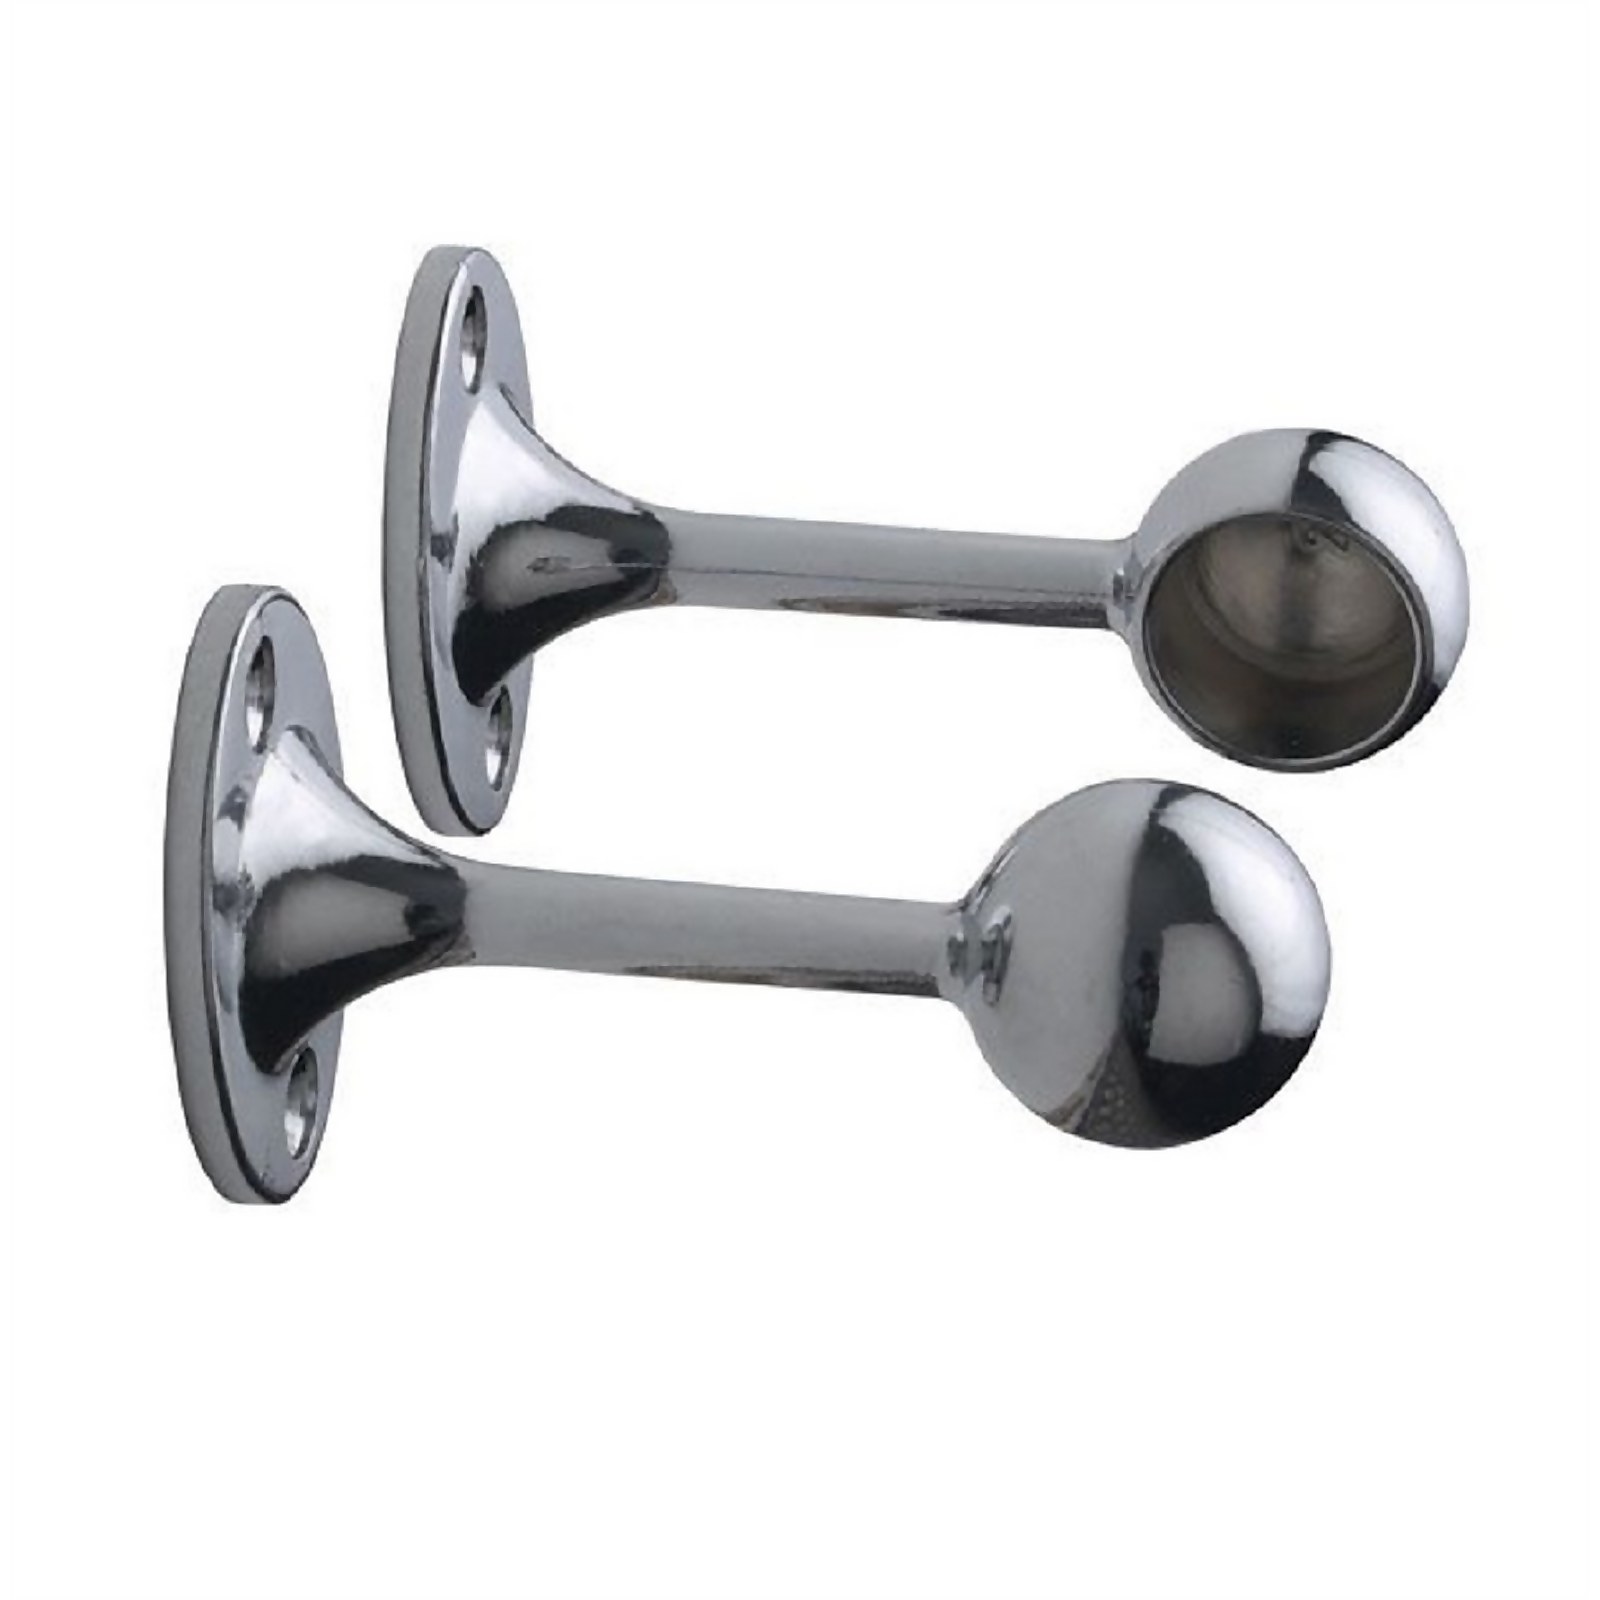 Photo of Rothley Deluxe End Bracket - Chrome - 25mm - 2 Pack